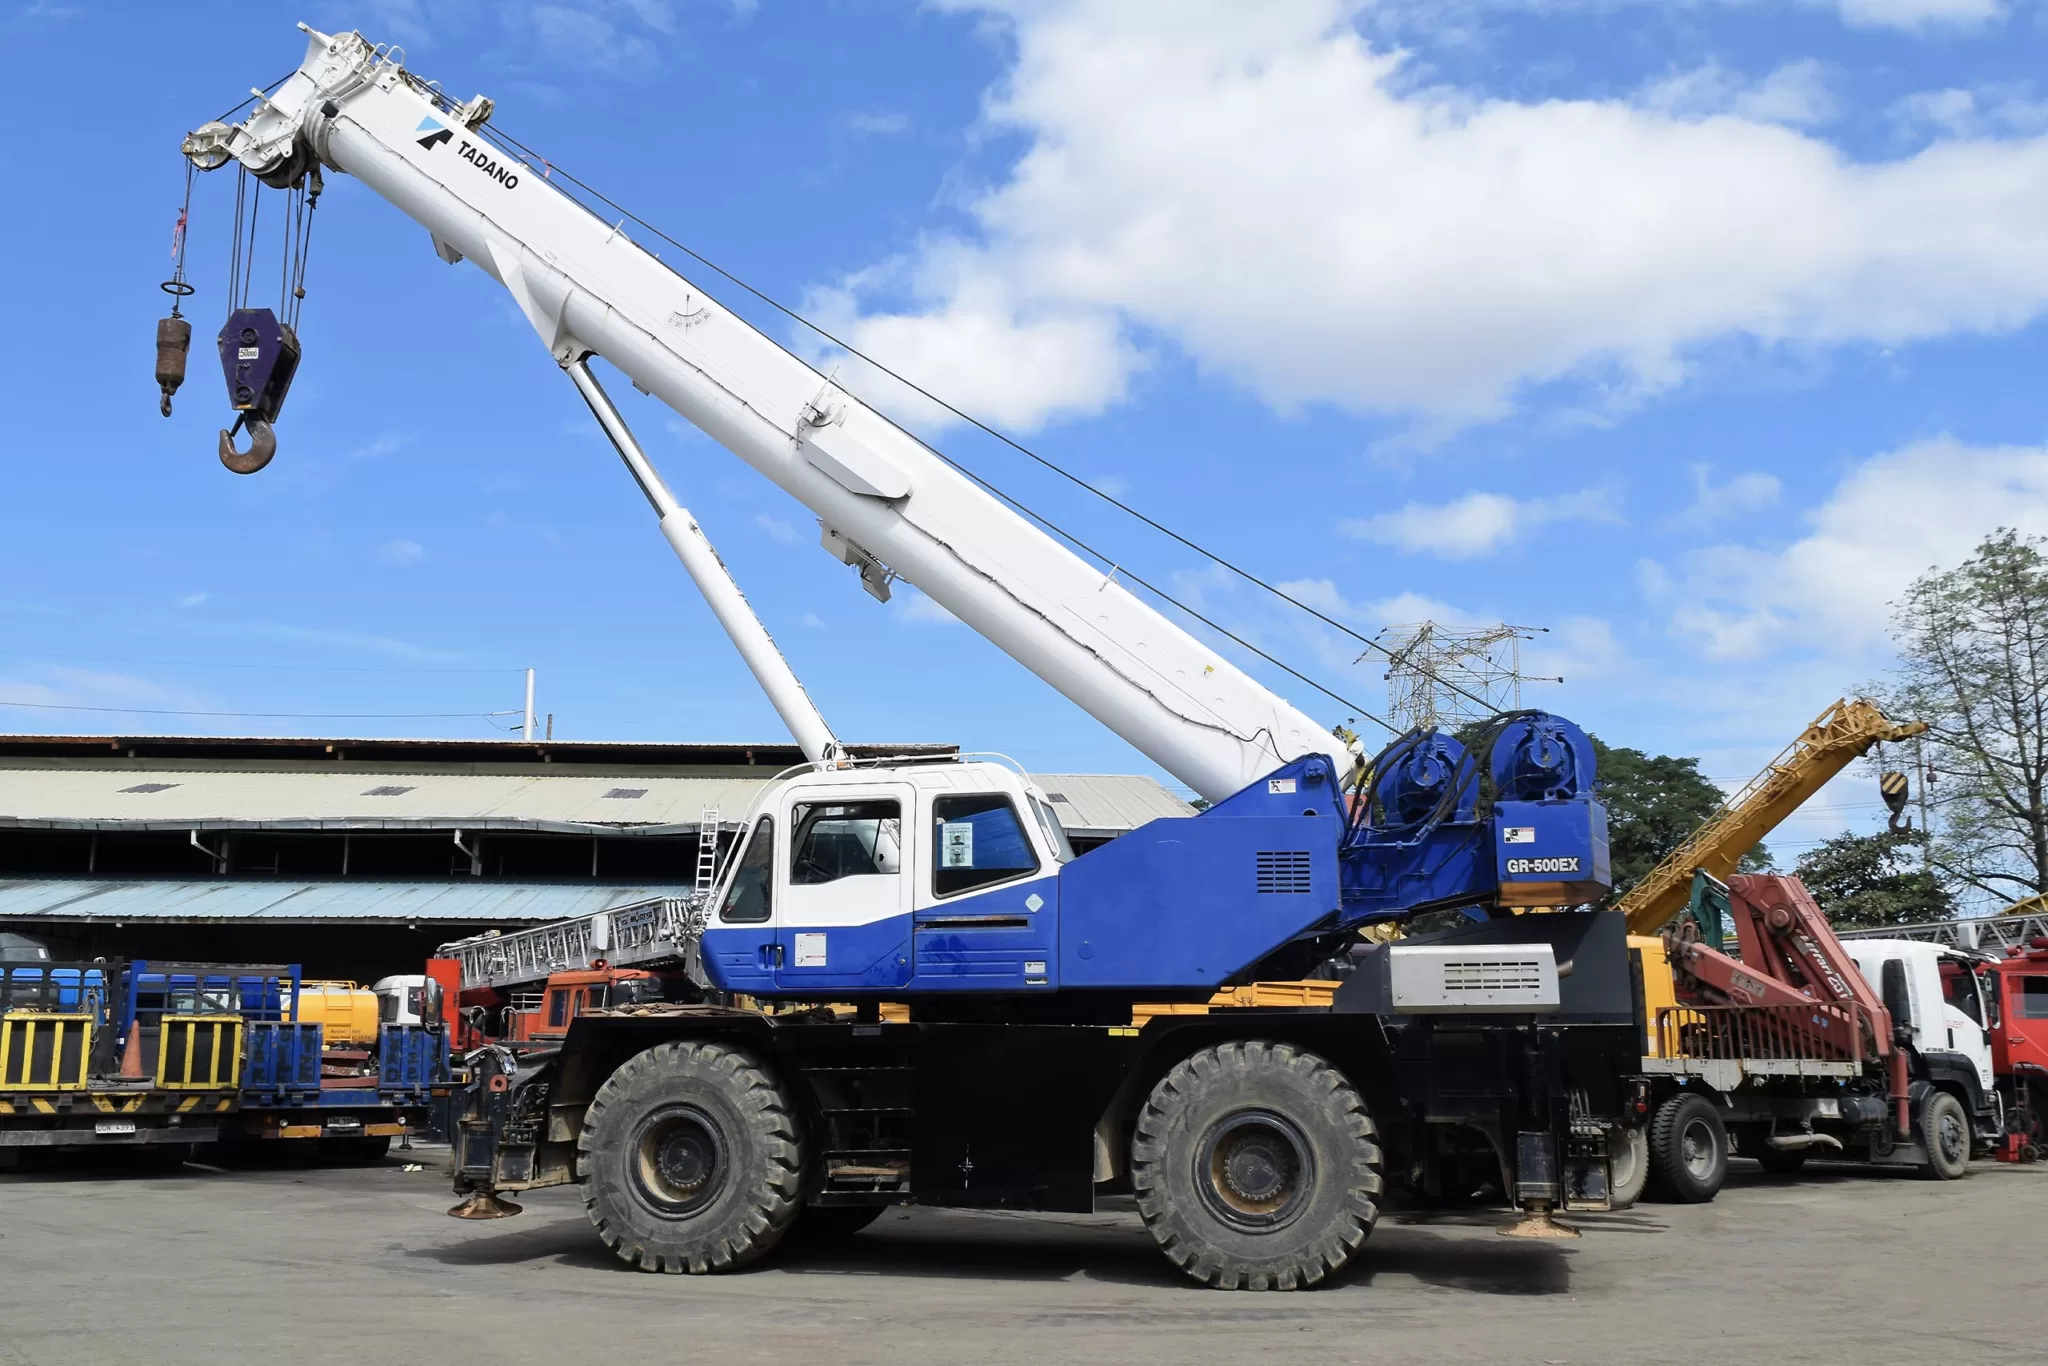 A large blue Tadano crane out for routine resting in the Guzent equipment yard.